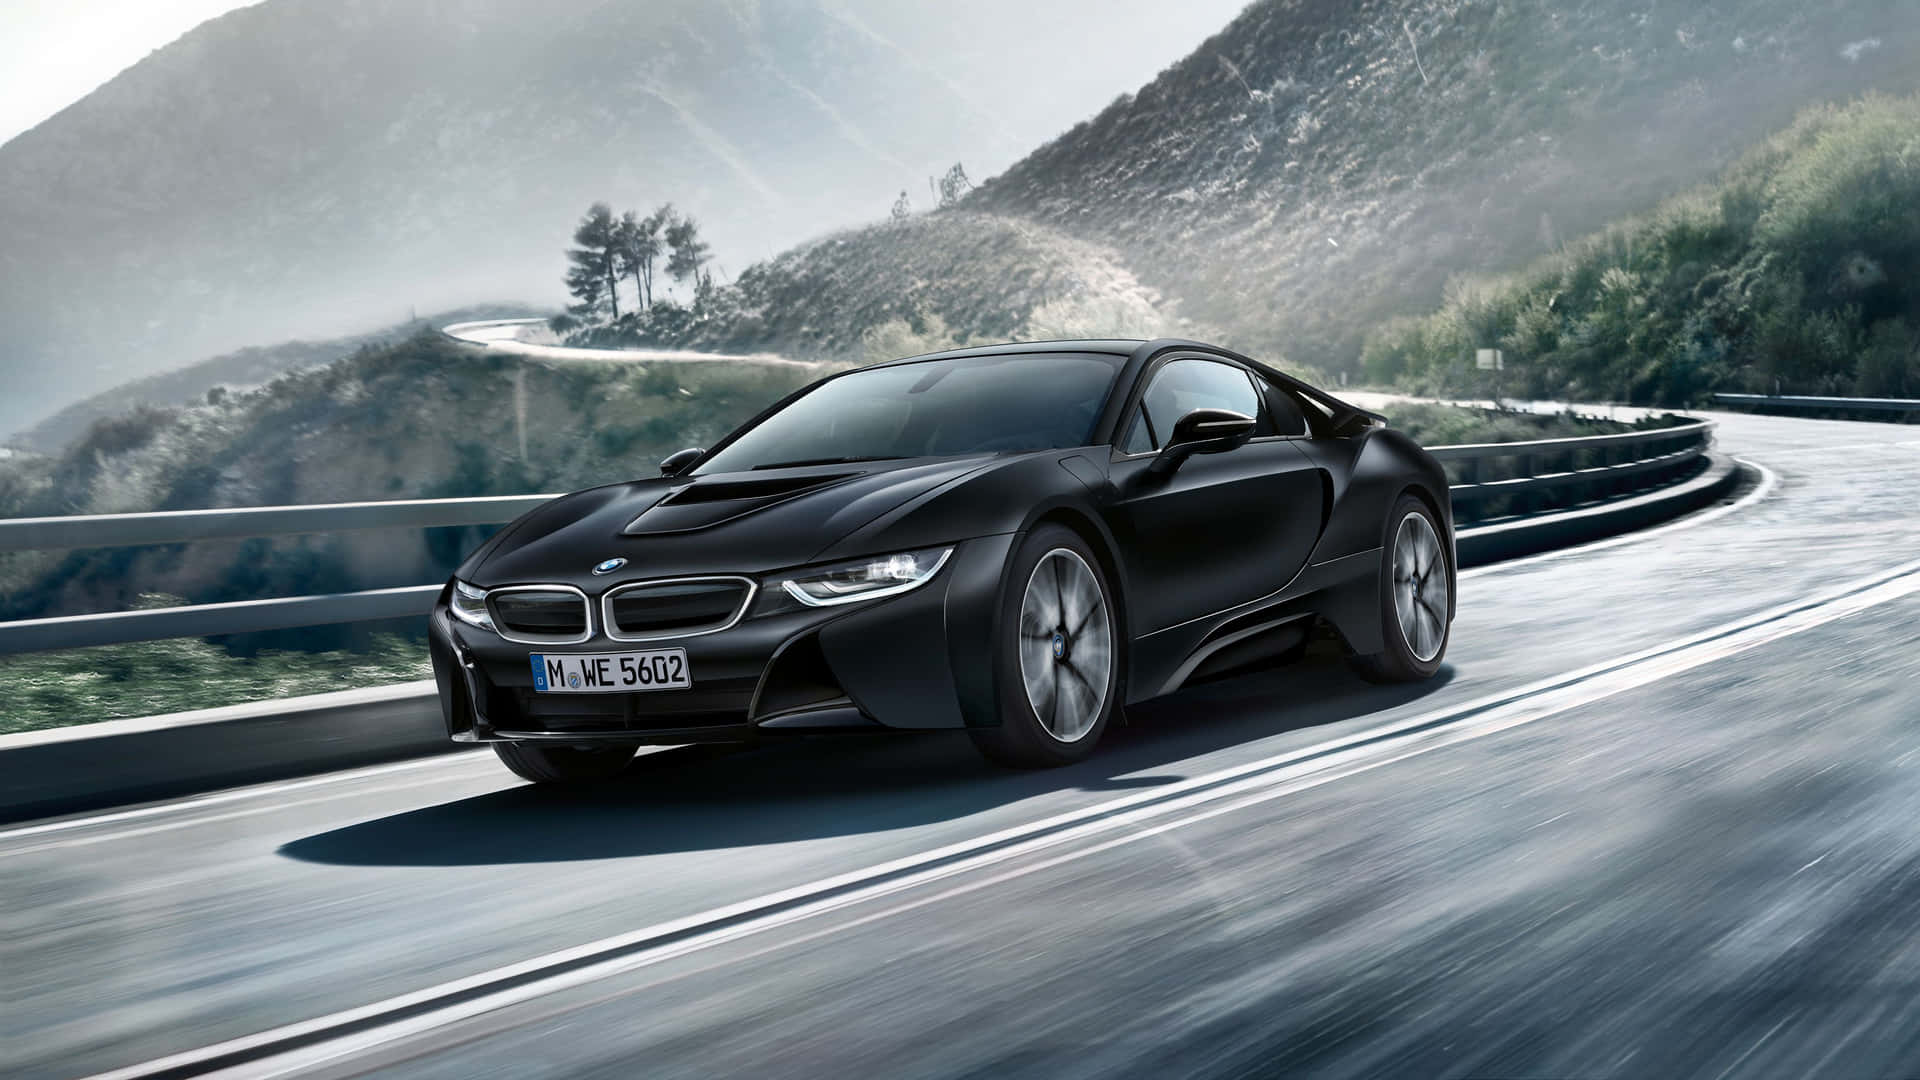 Get Behind The Wheel Of A Luxurious Bmw